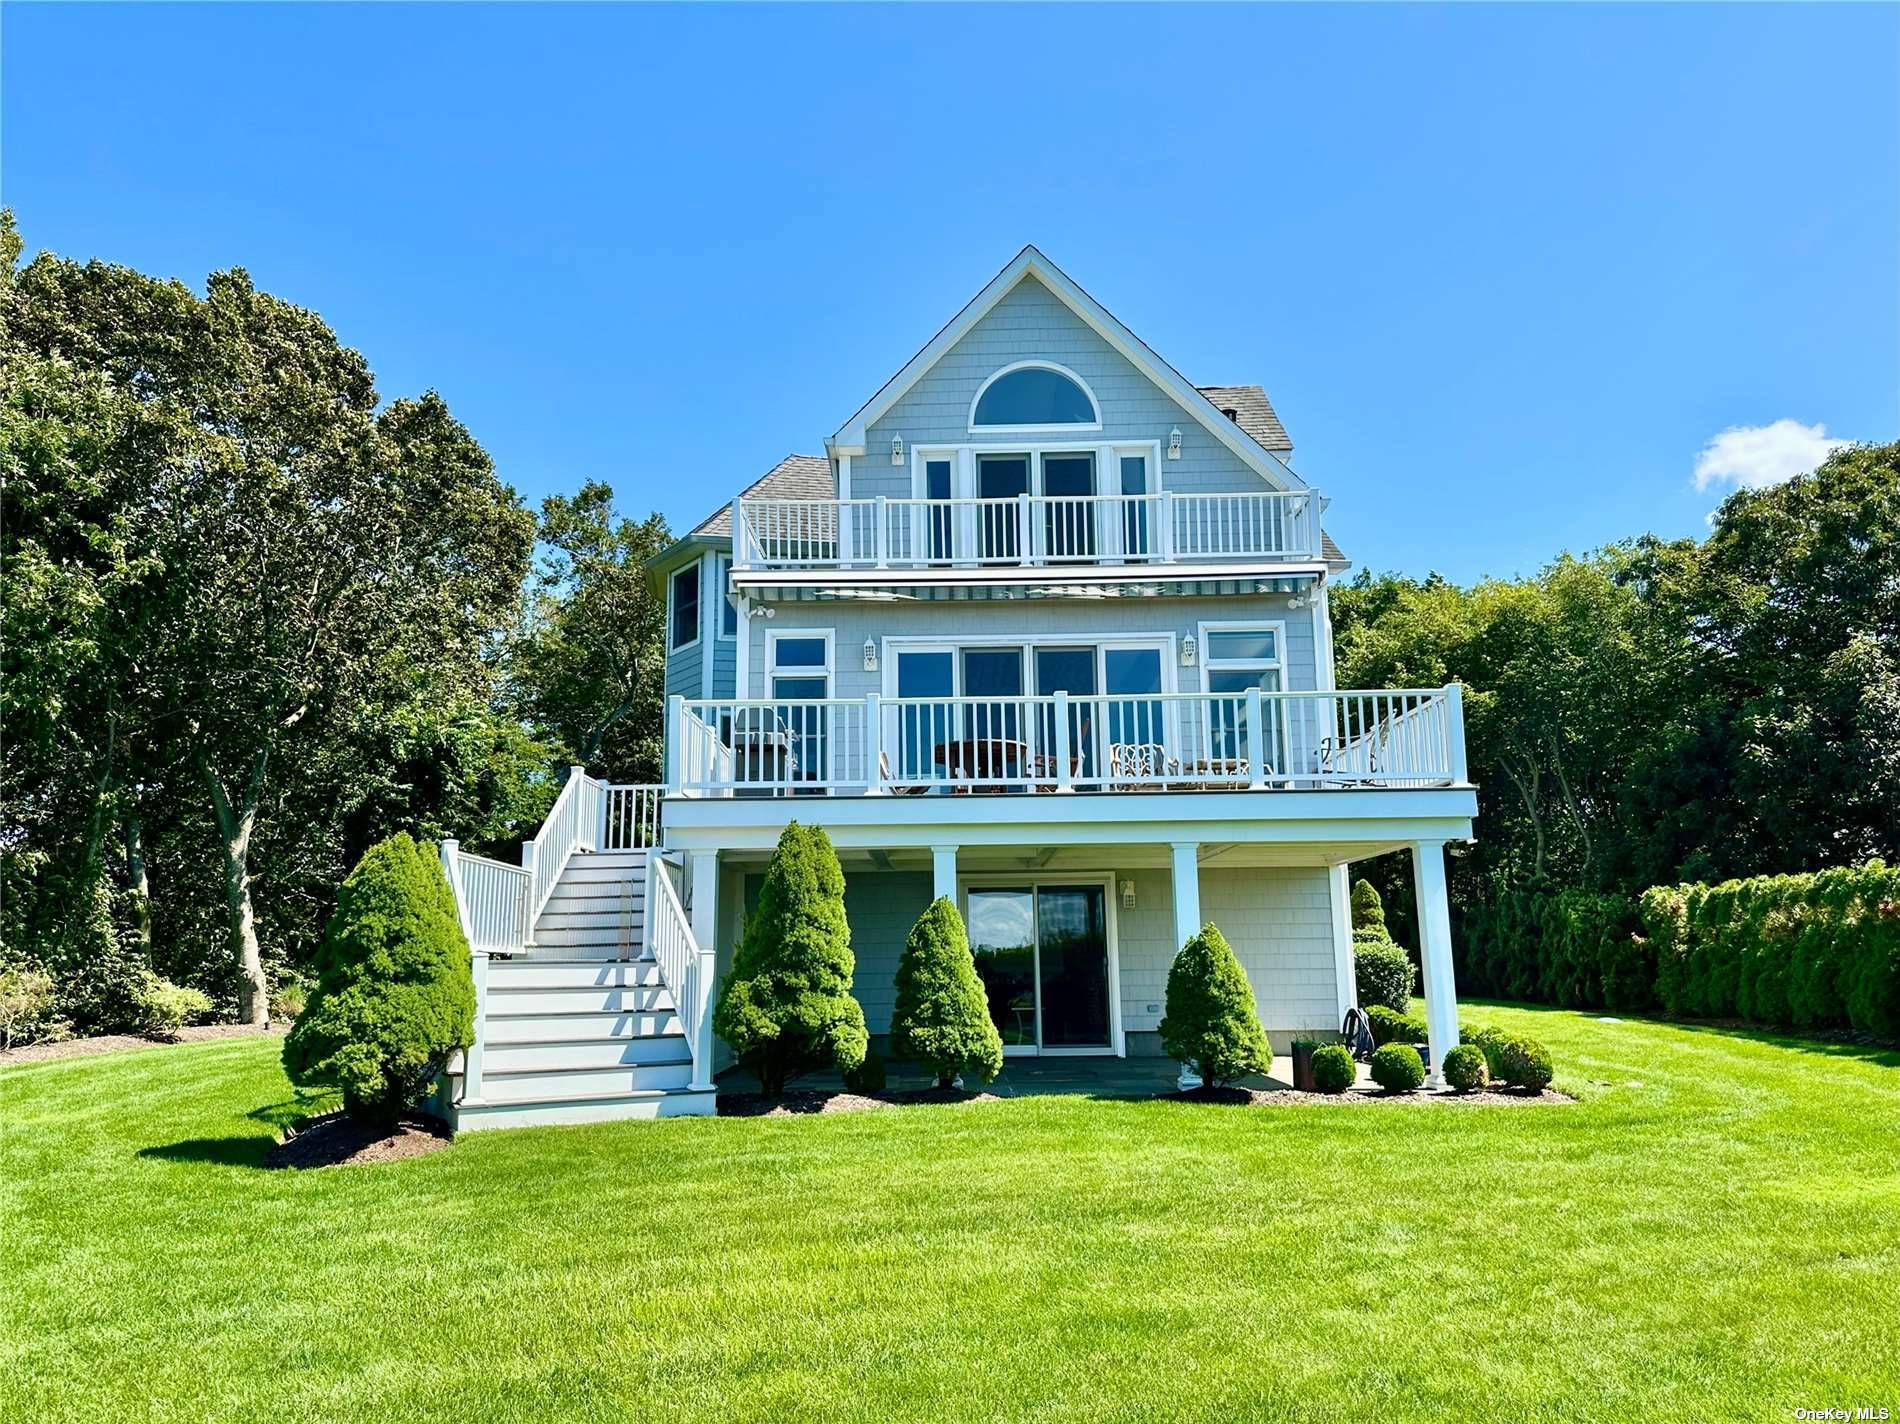 Enjoy the off season in this gorgeous, waterfront home overlooking the Long Island Sound.